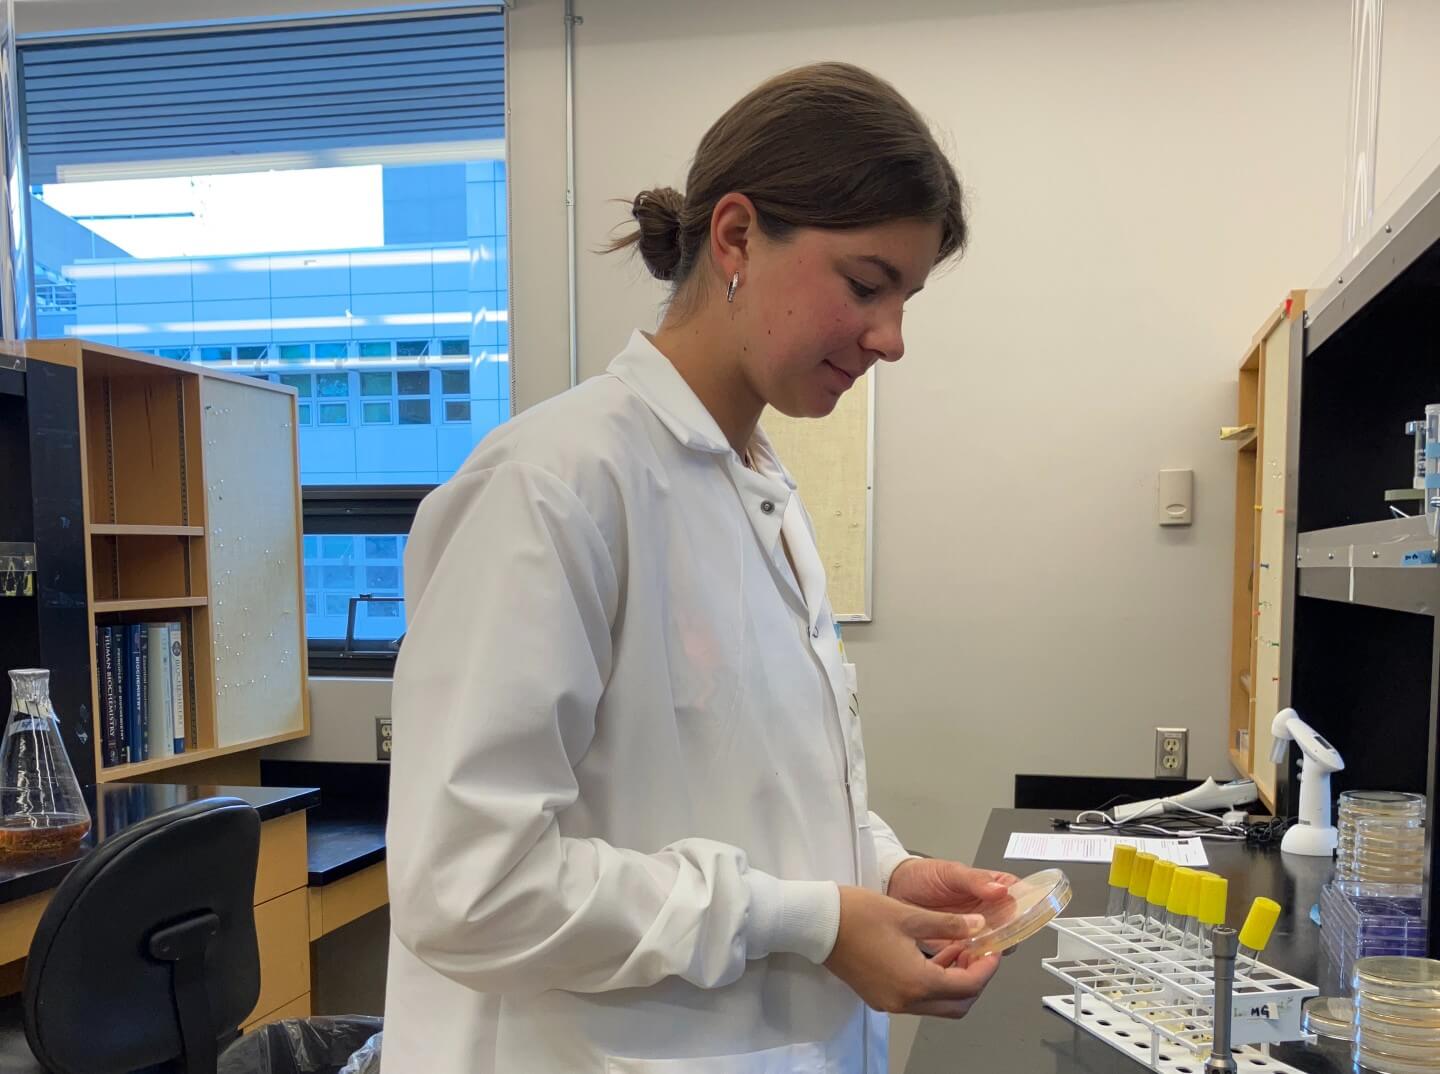 Elise Therrien in her lab coat, holding an agar plate at the lab bench